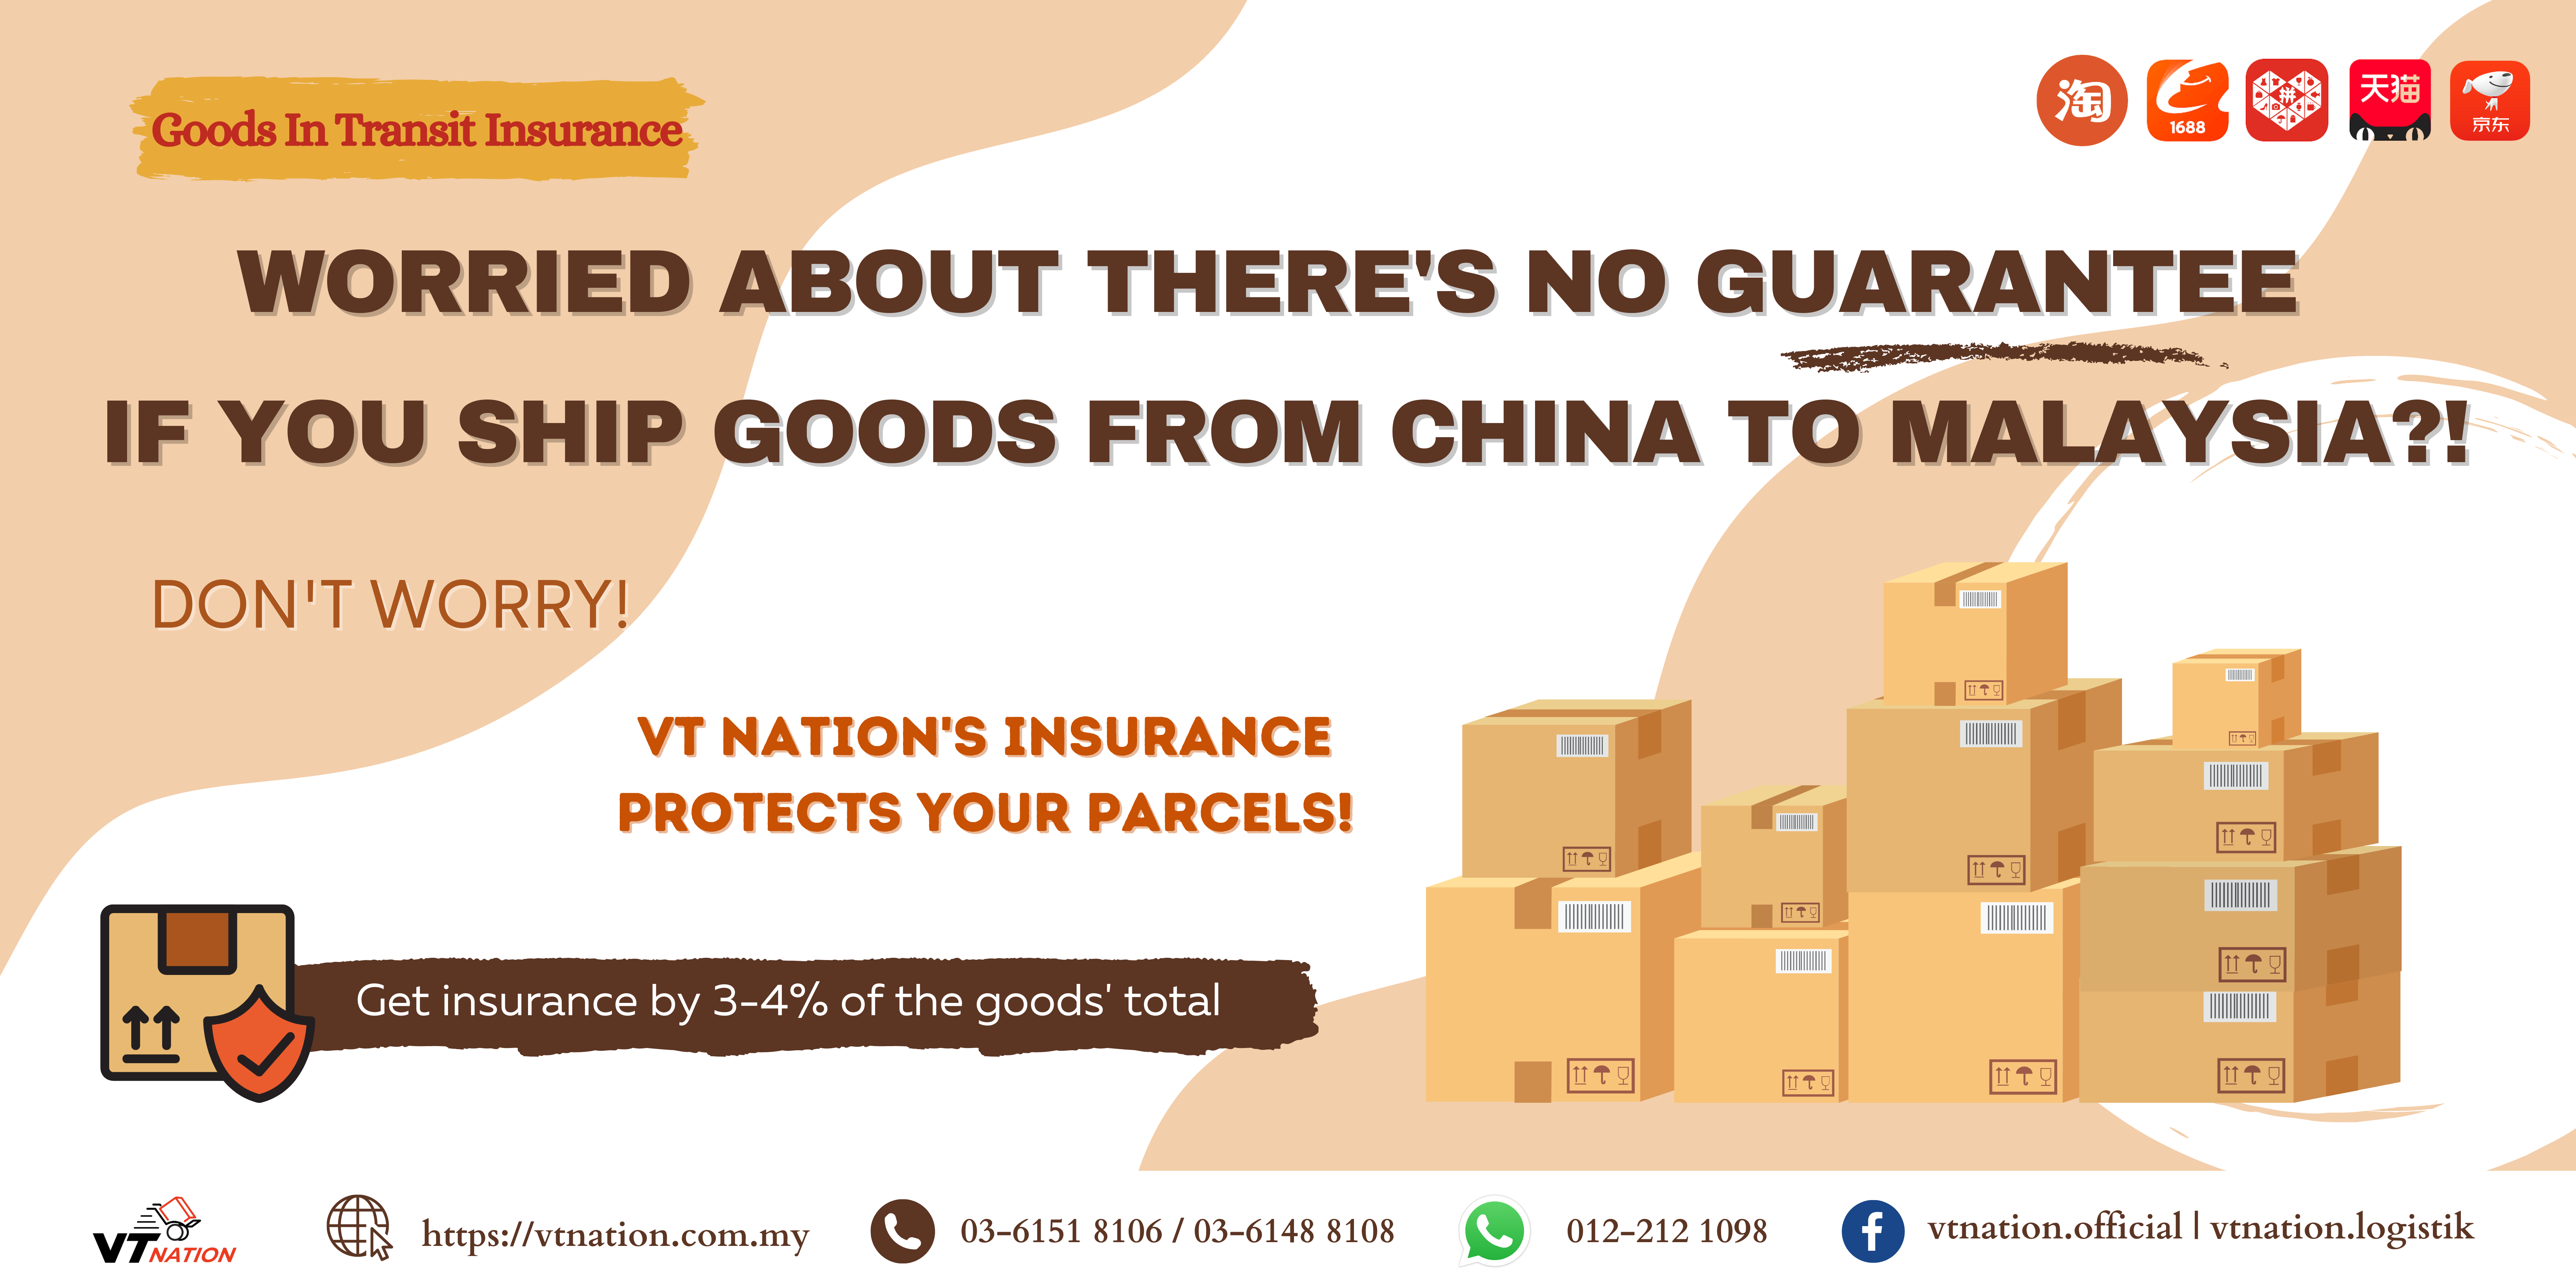 Worried about there’s no guarantee if you ship goods from China to Malaysia? (SUMMARY)